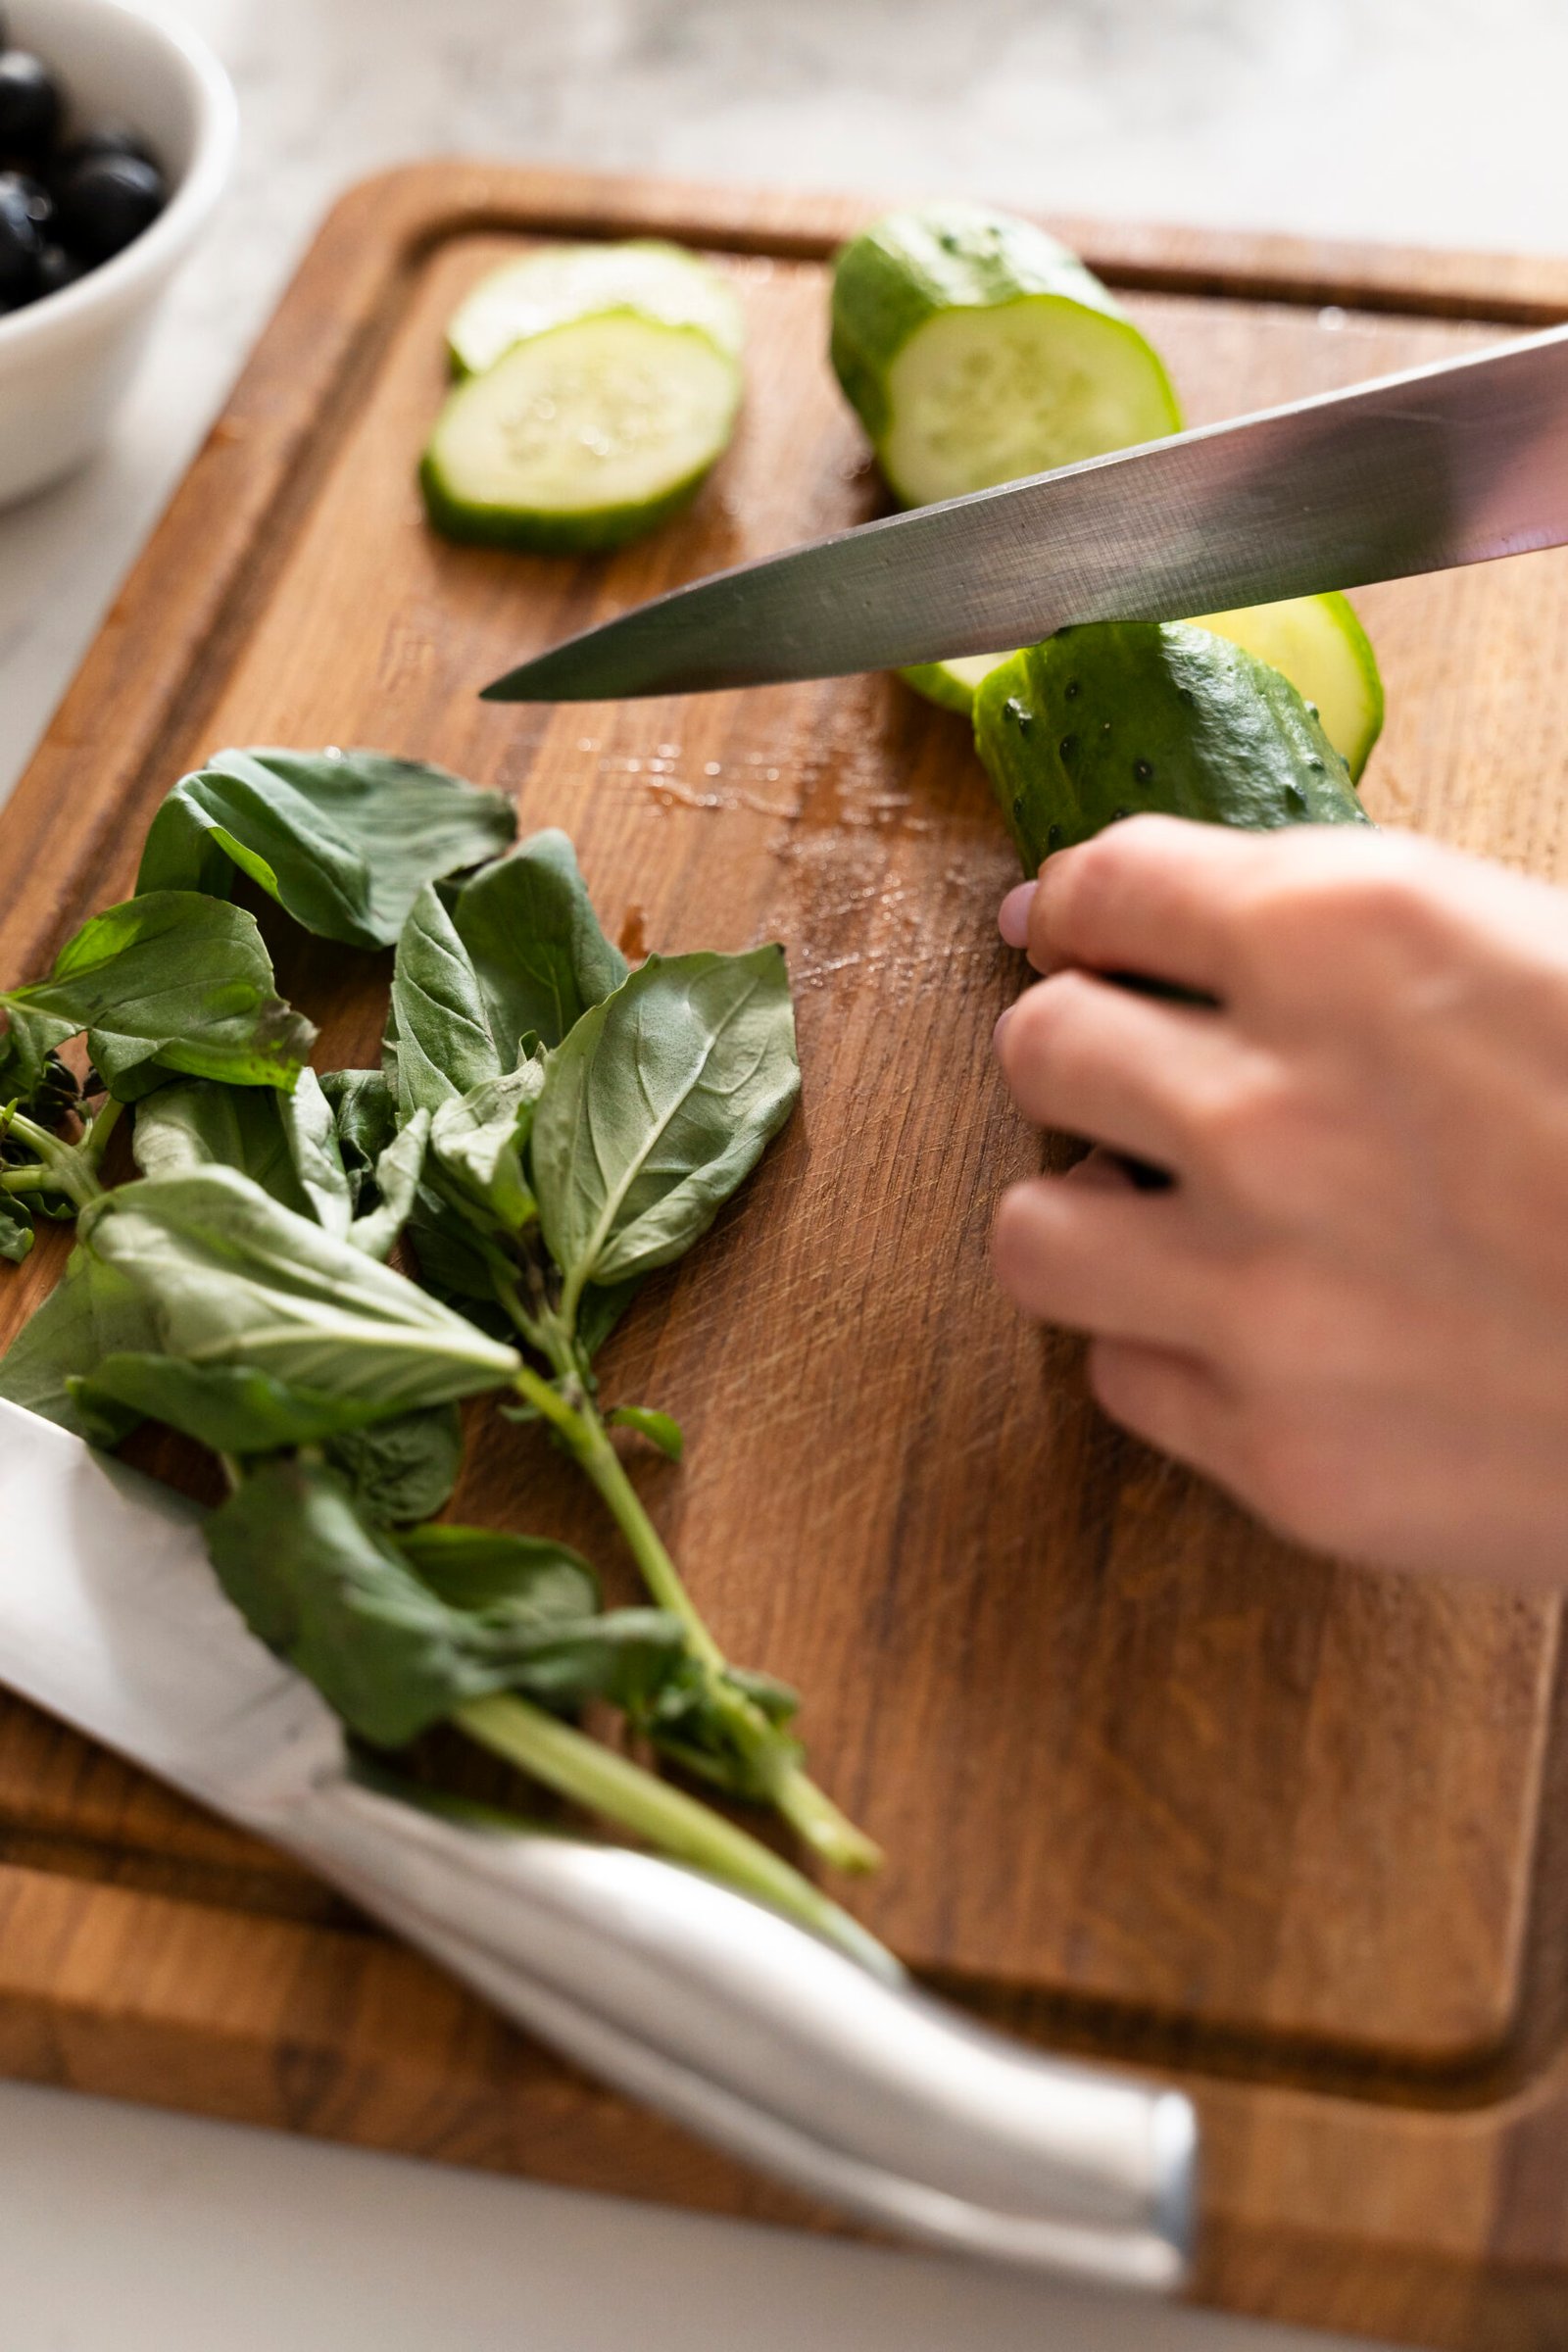 How to cook with fresh herbs